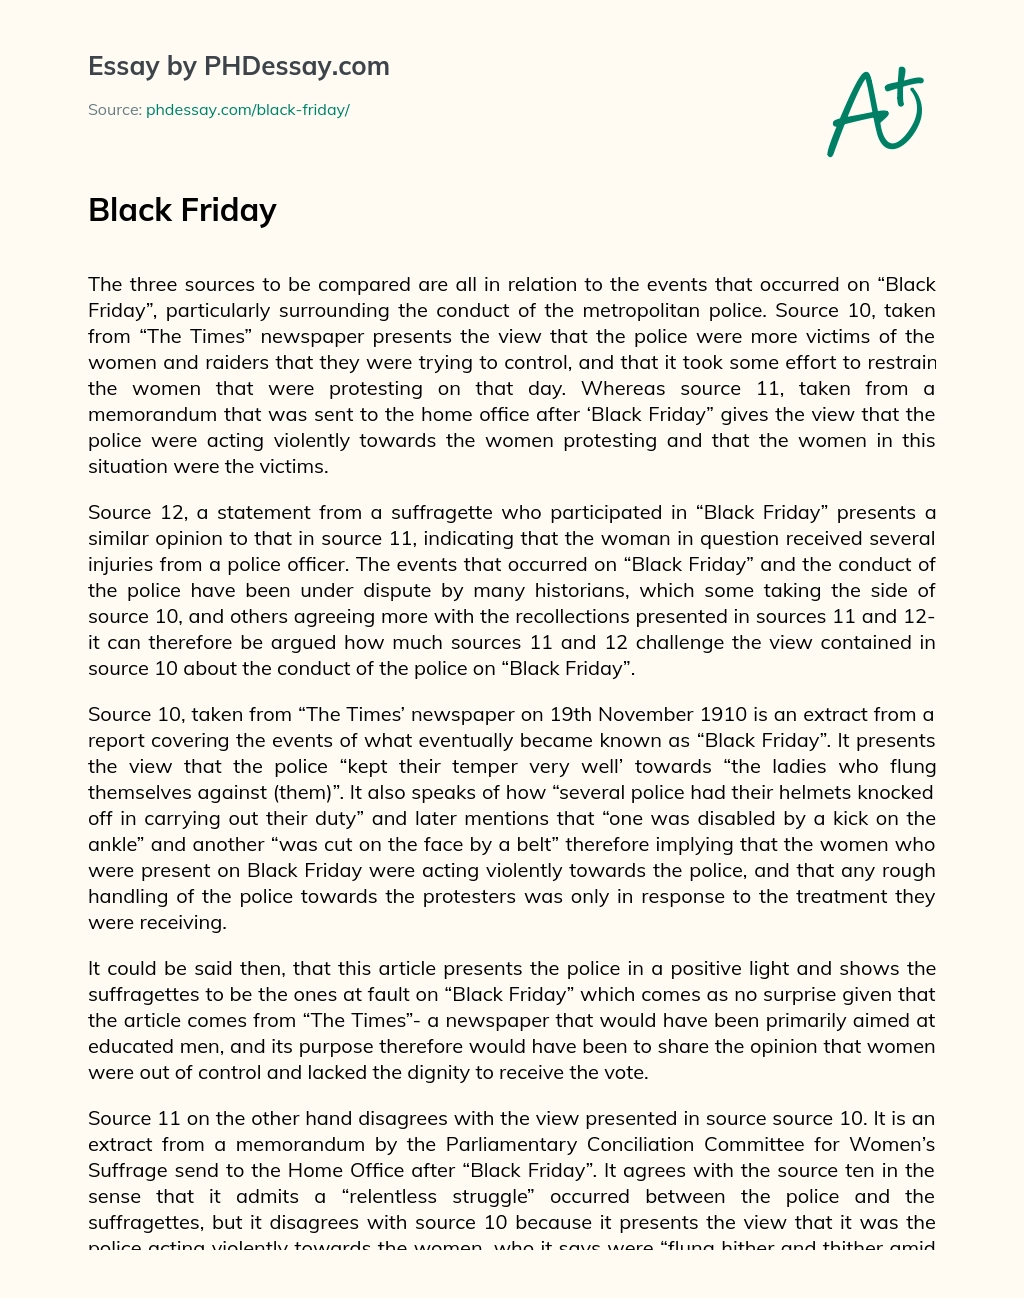 Different perspectives on police conduct during Black Friday protests essay